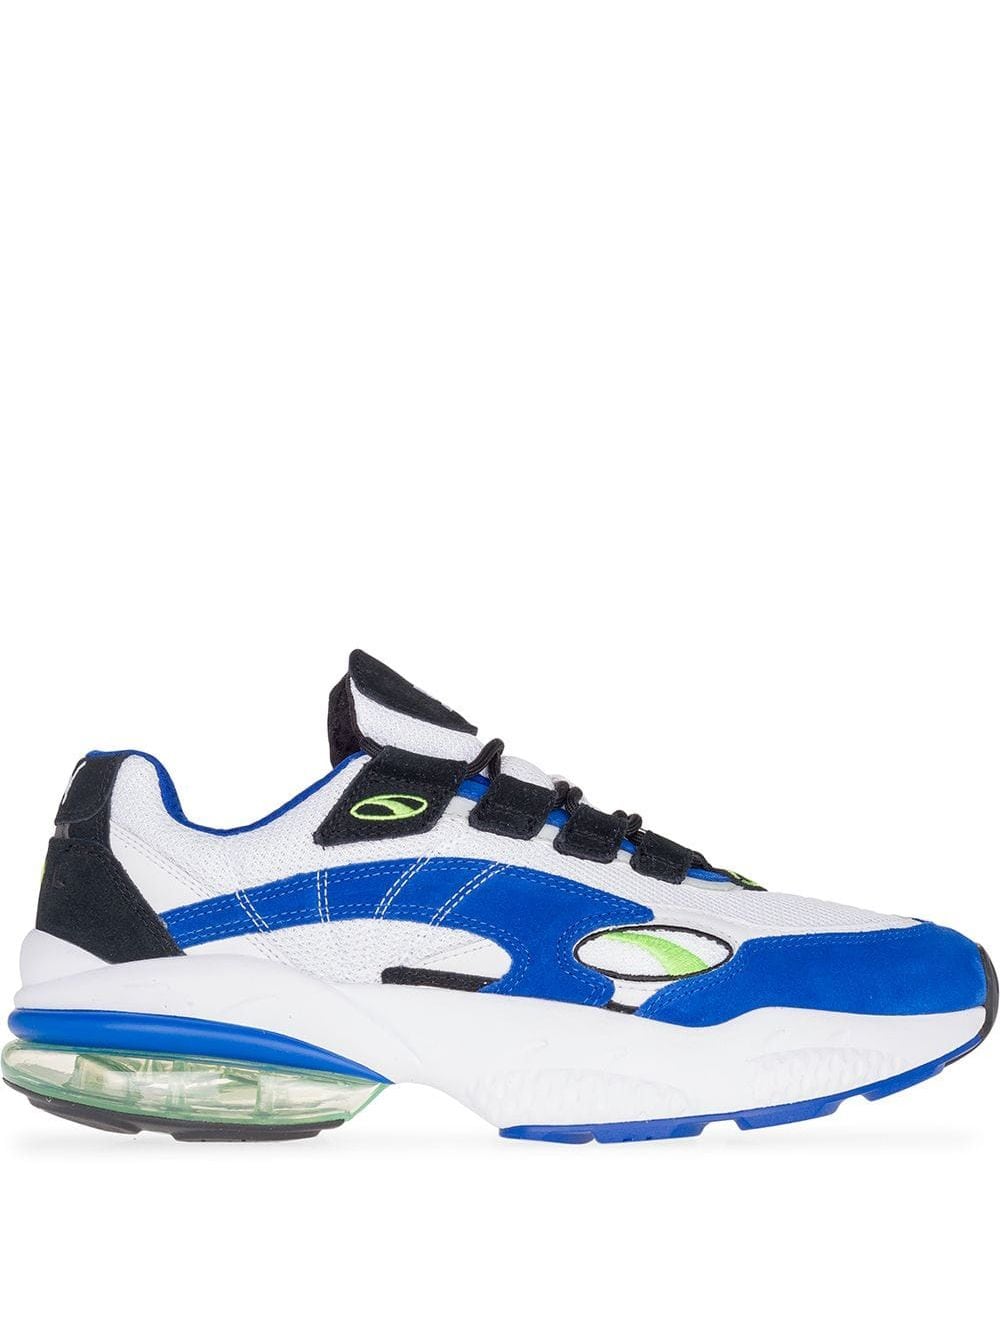 Shop white \u0026 blue Puma Cell Venom sneakers with Express Delivery - Farfetch